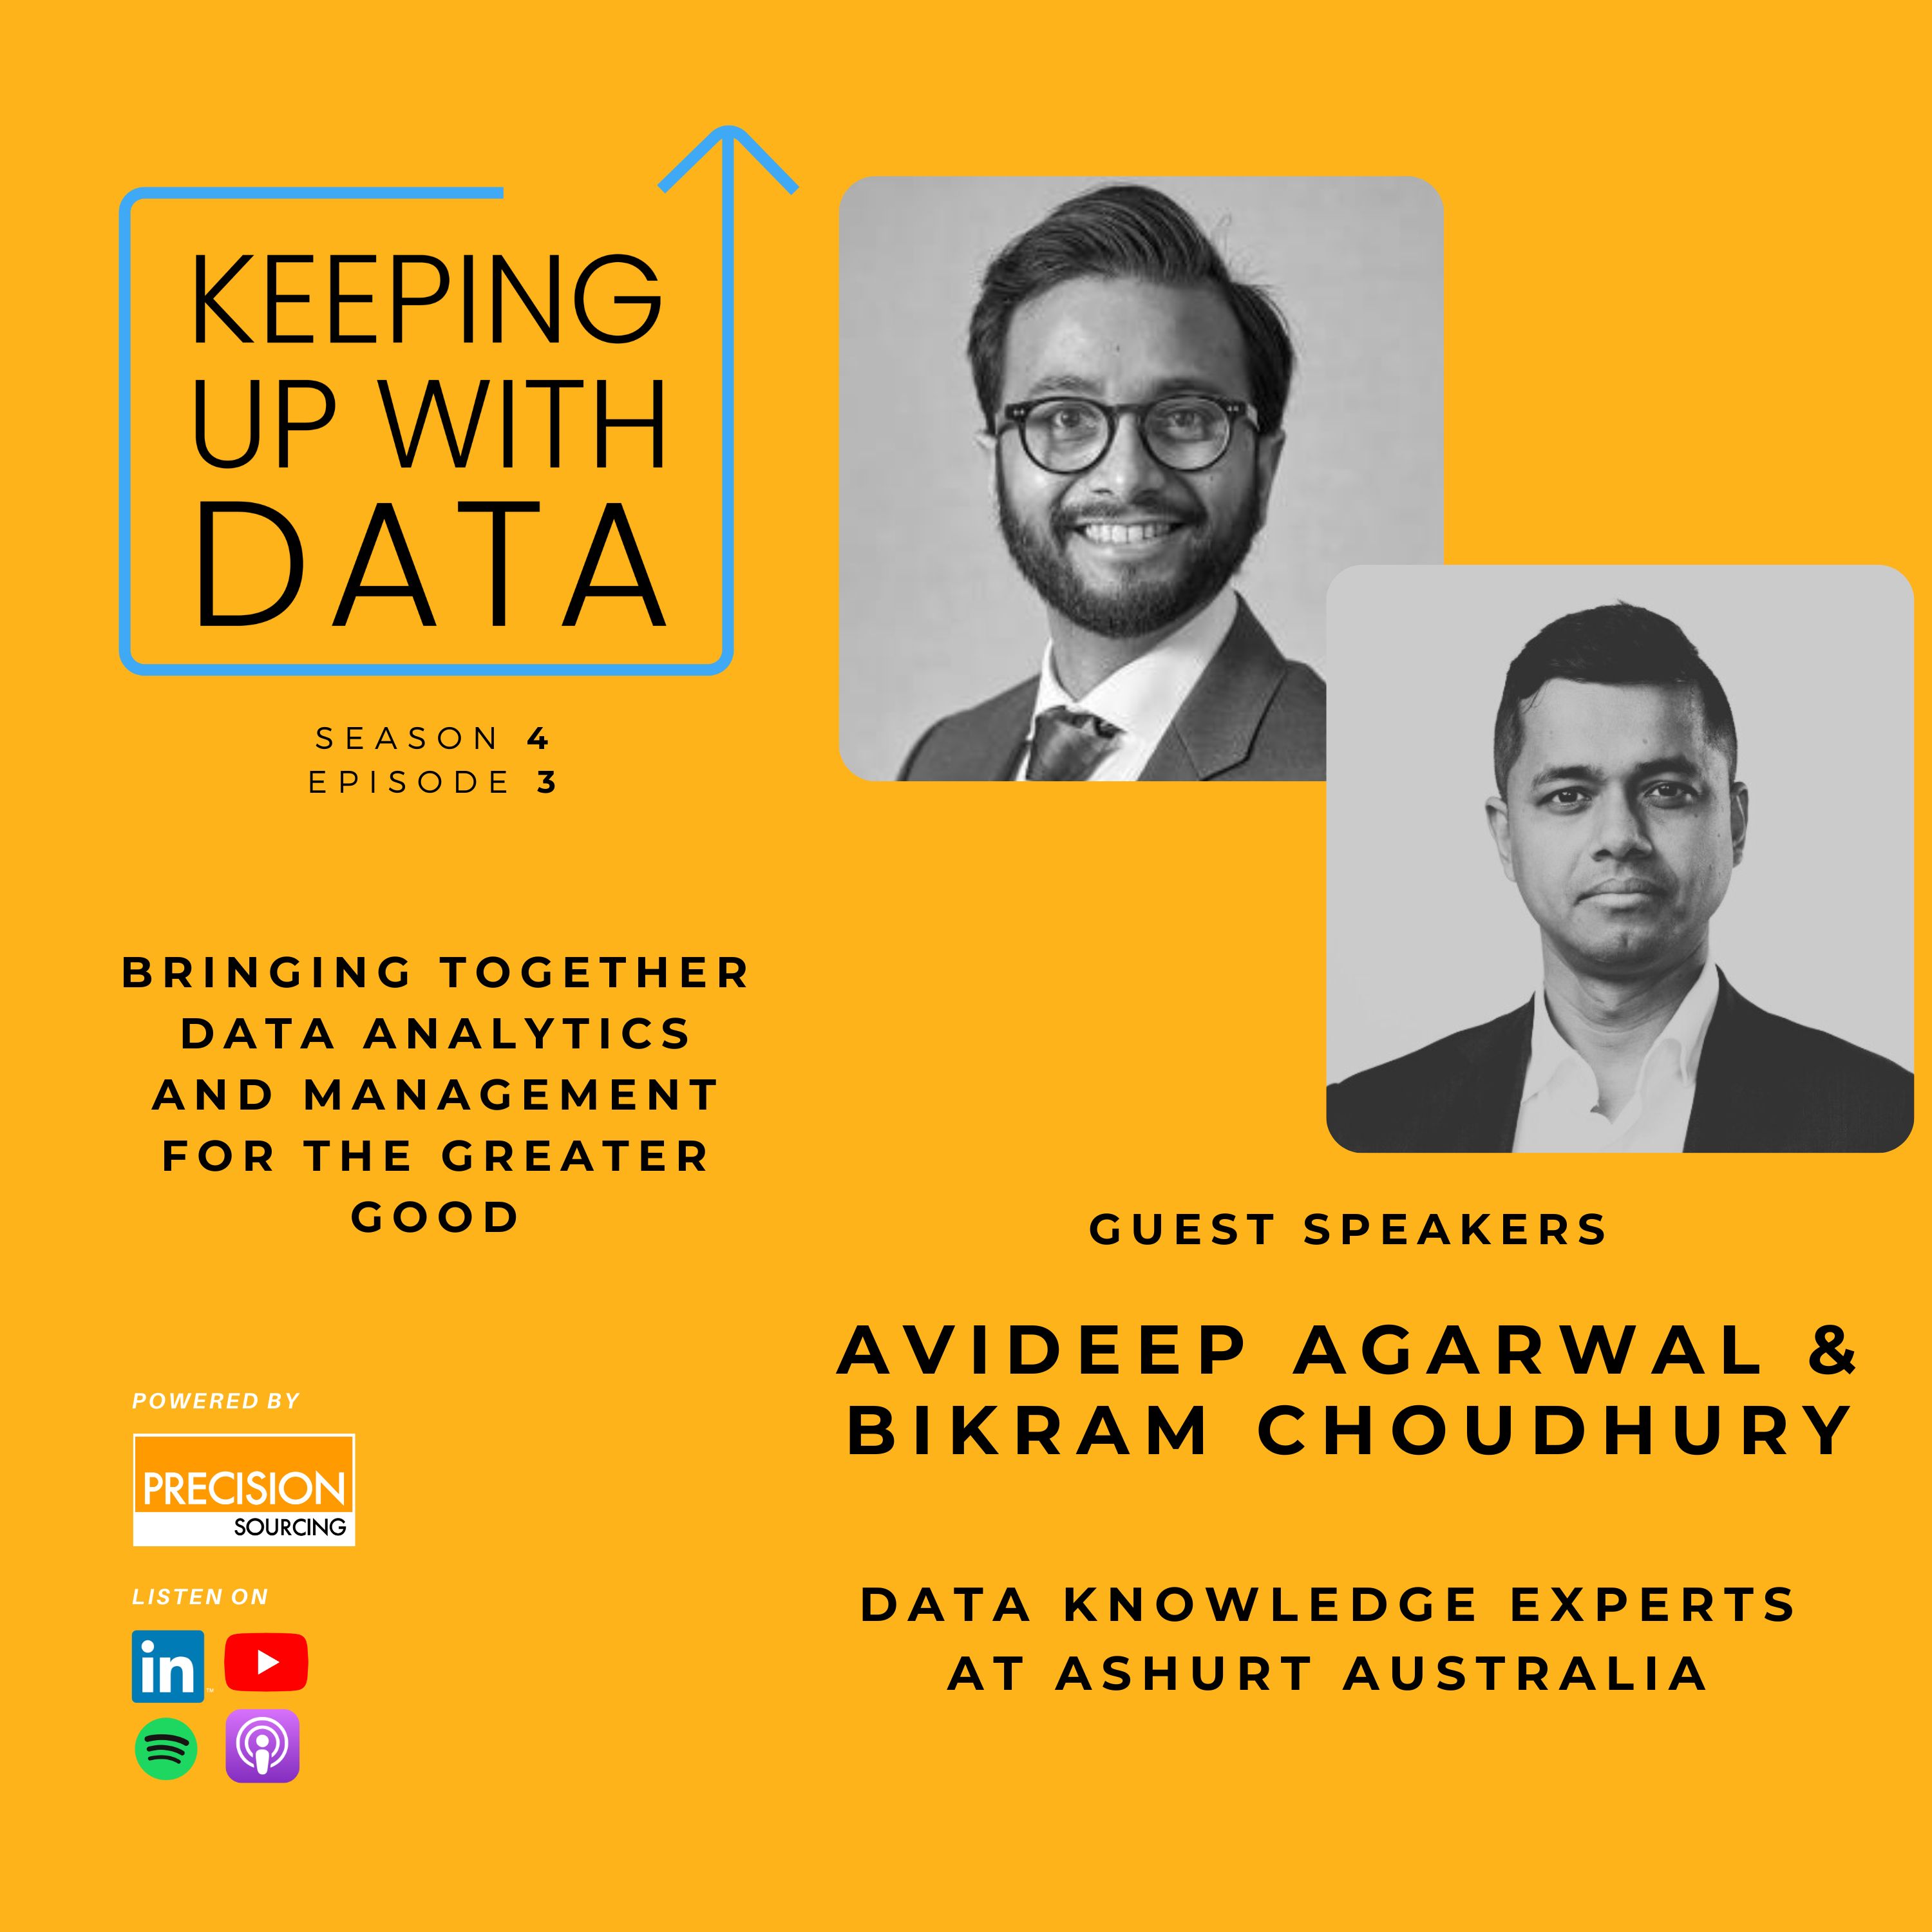 Bringing together Data Analytics and Management for the Greater Good With Avideep Agarwal & Bikram Choudhury